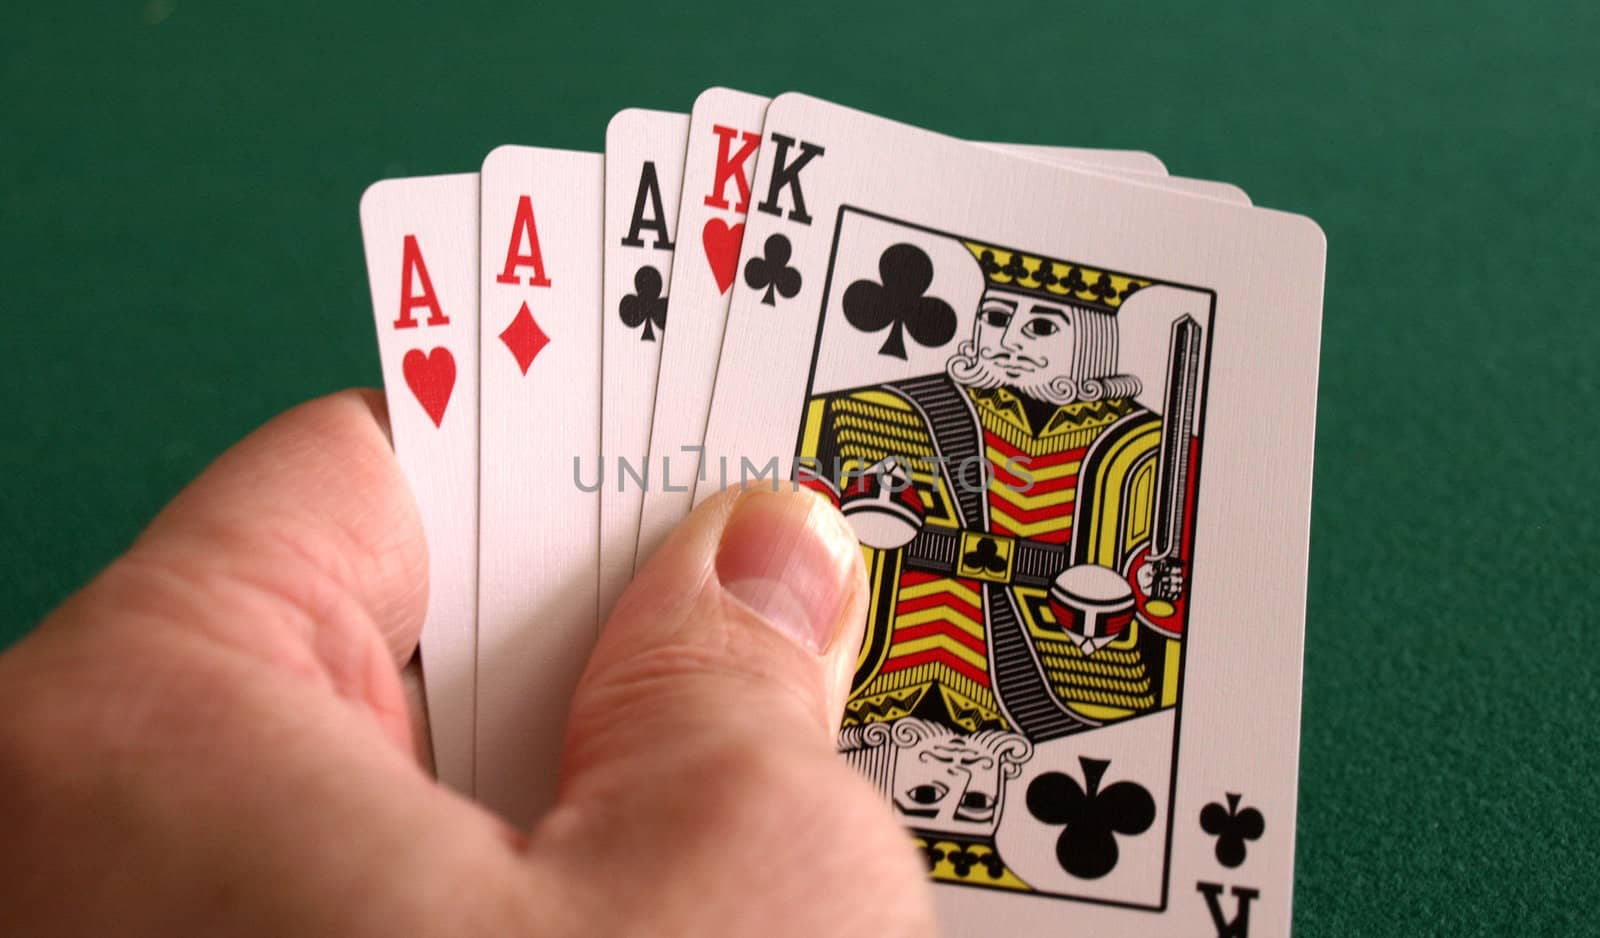 a great pojer hand with aces and kings